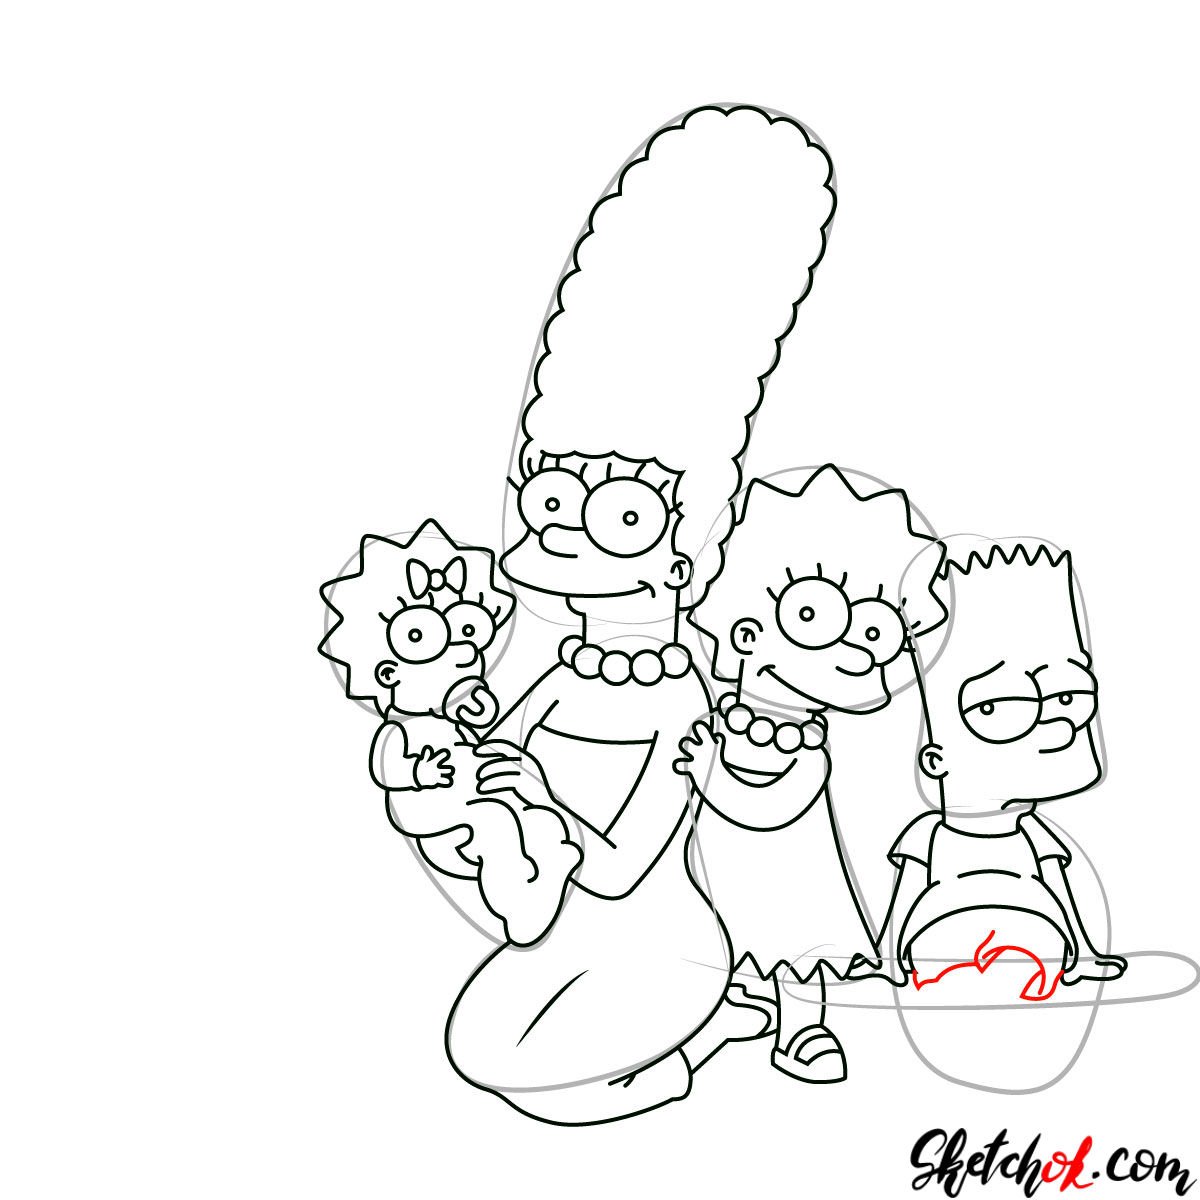 How to draw the Simpsons Family - step 20